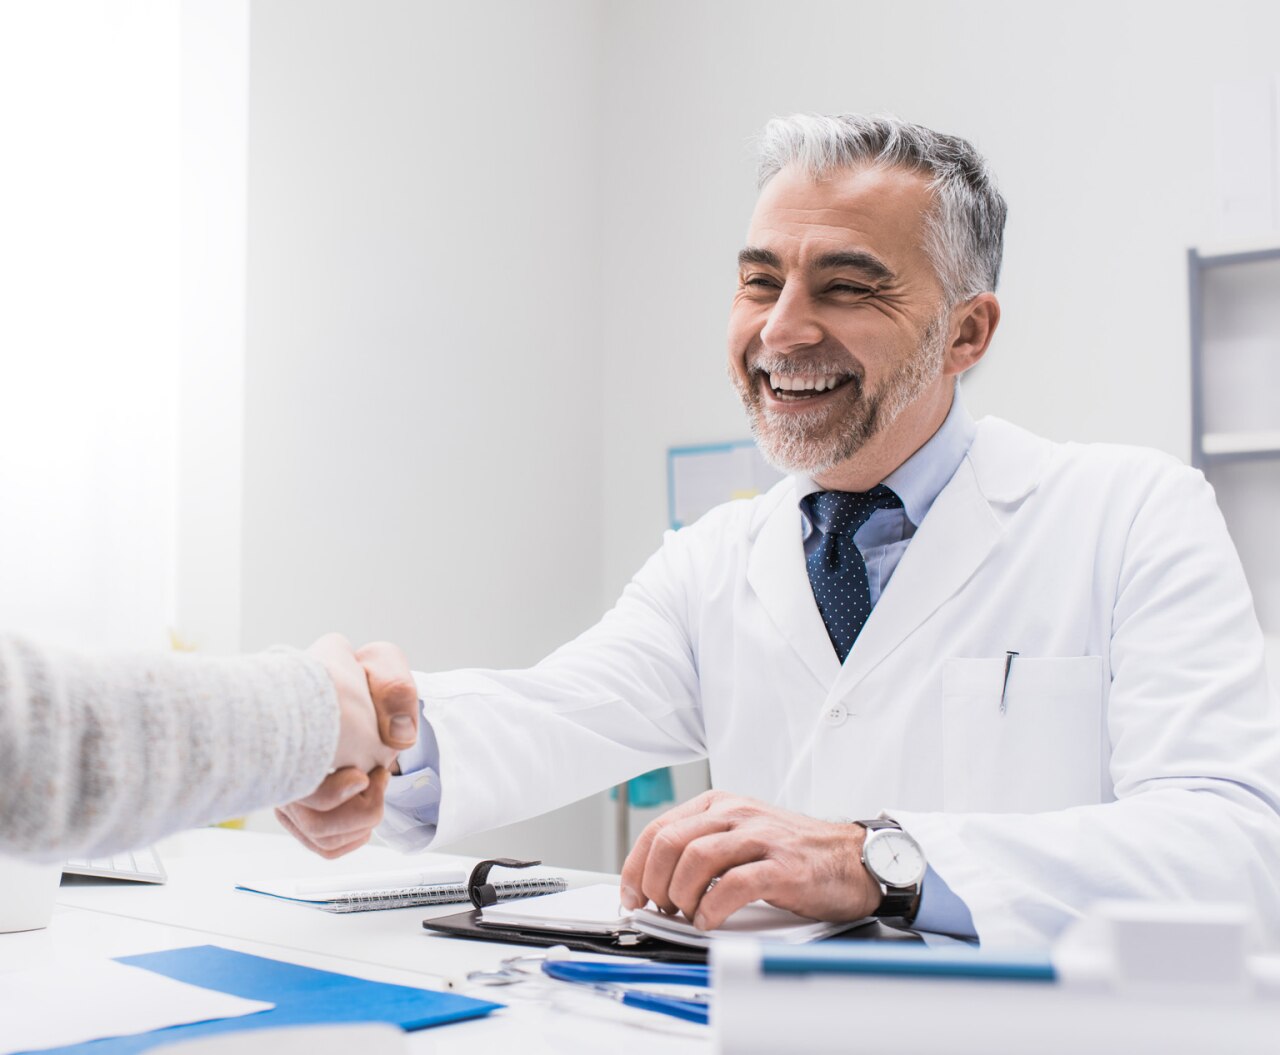 Smiling doctor and female patient shaking hands, healthcare professionals concept; Shutterstock ID 704550271; purchase_order: -; job: -; client: -; other: -